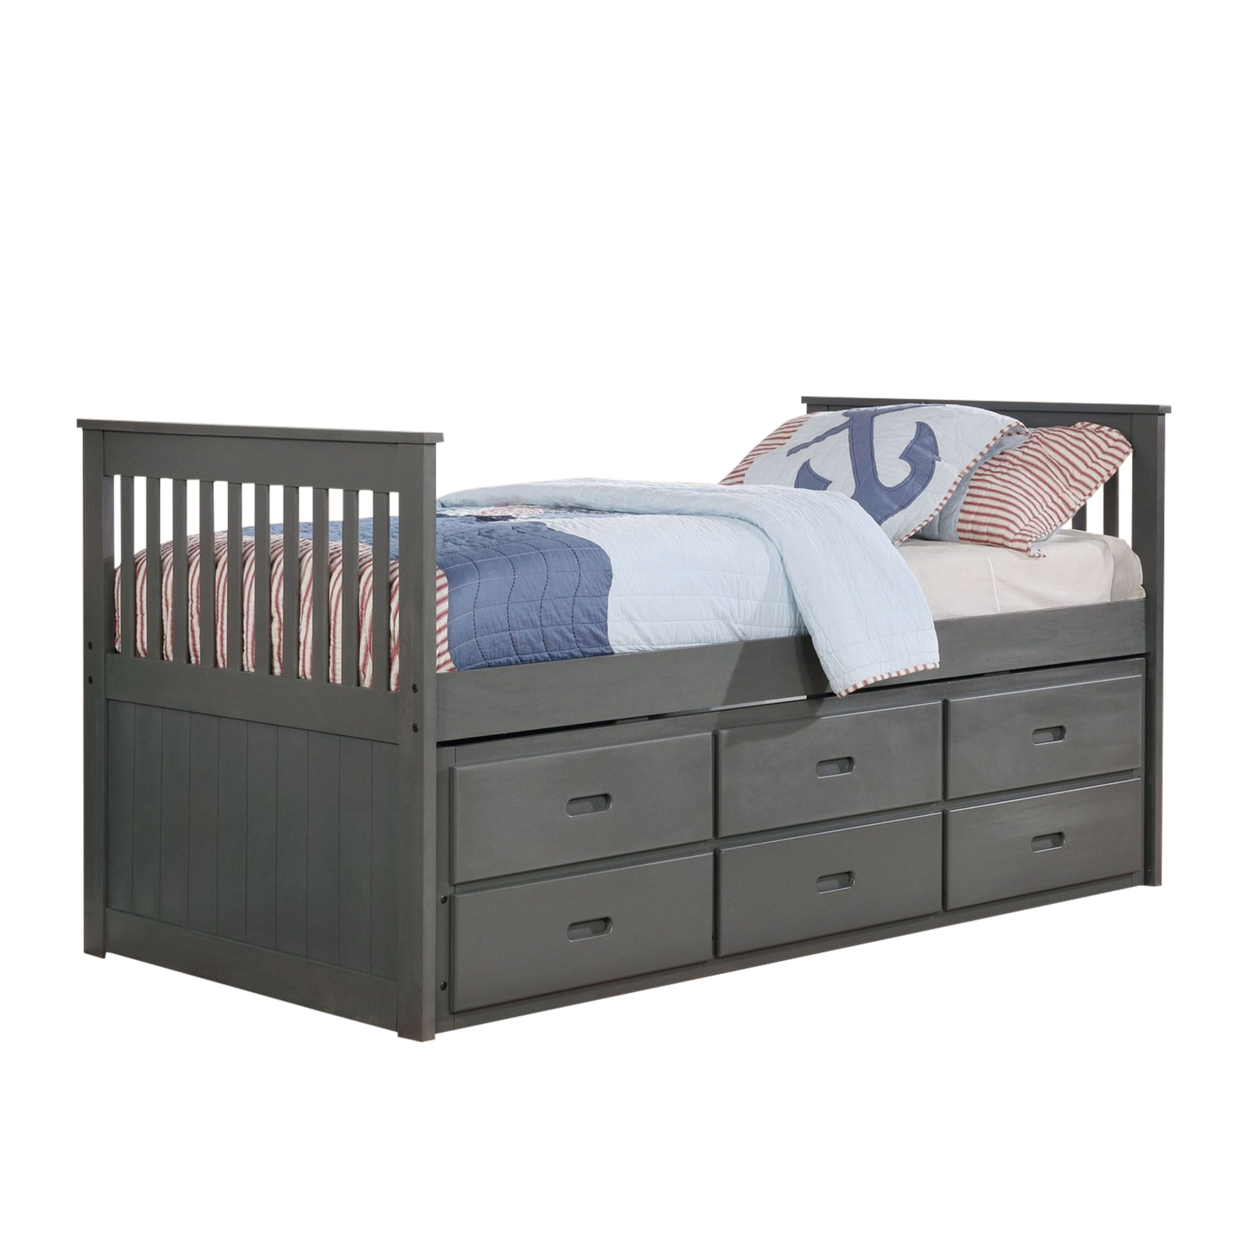 Mission Style Wooden Twin Captain Bed With Trundle And 3 Drawers, Gray- Saltoro Sherpi